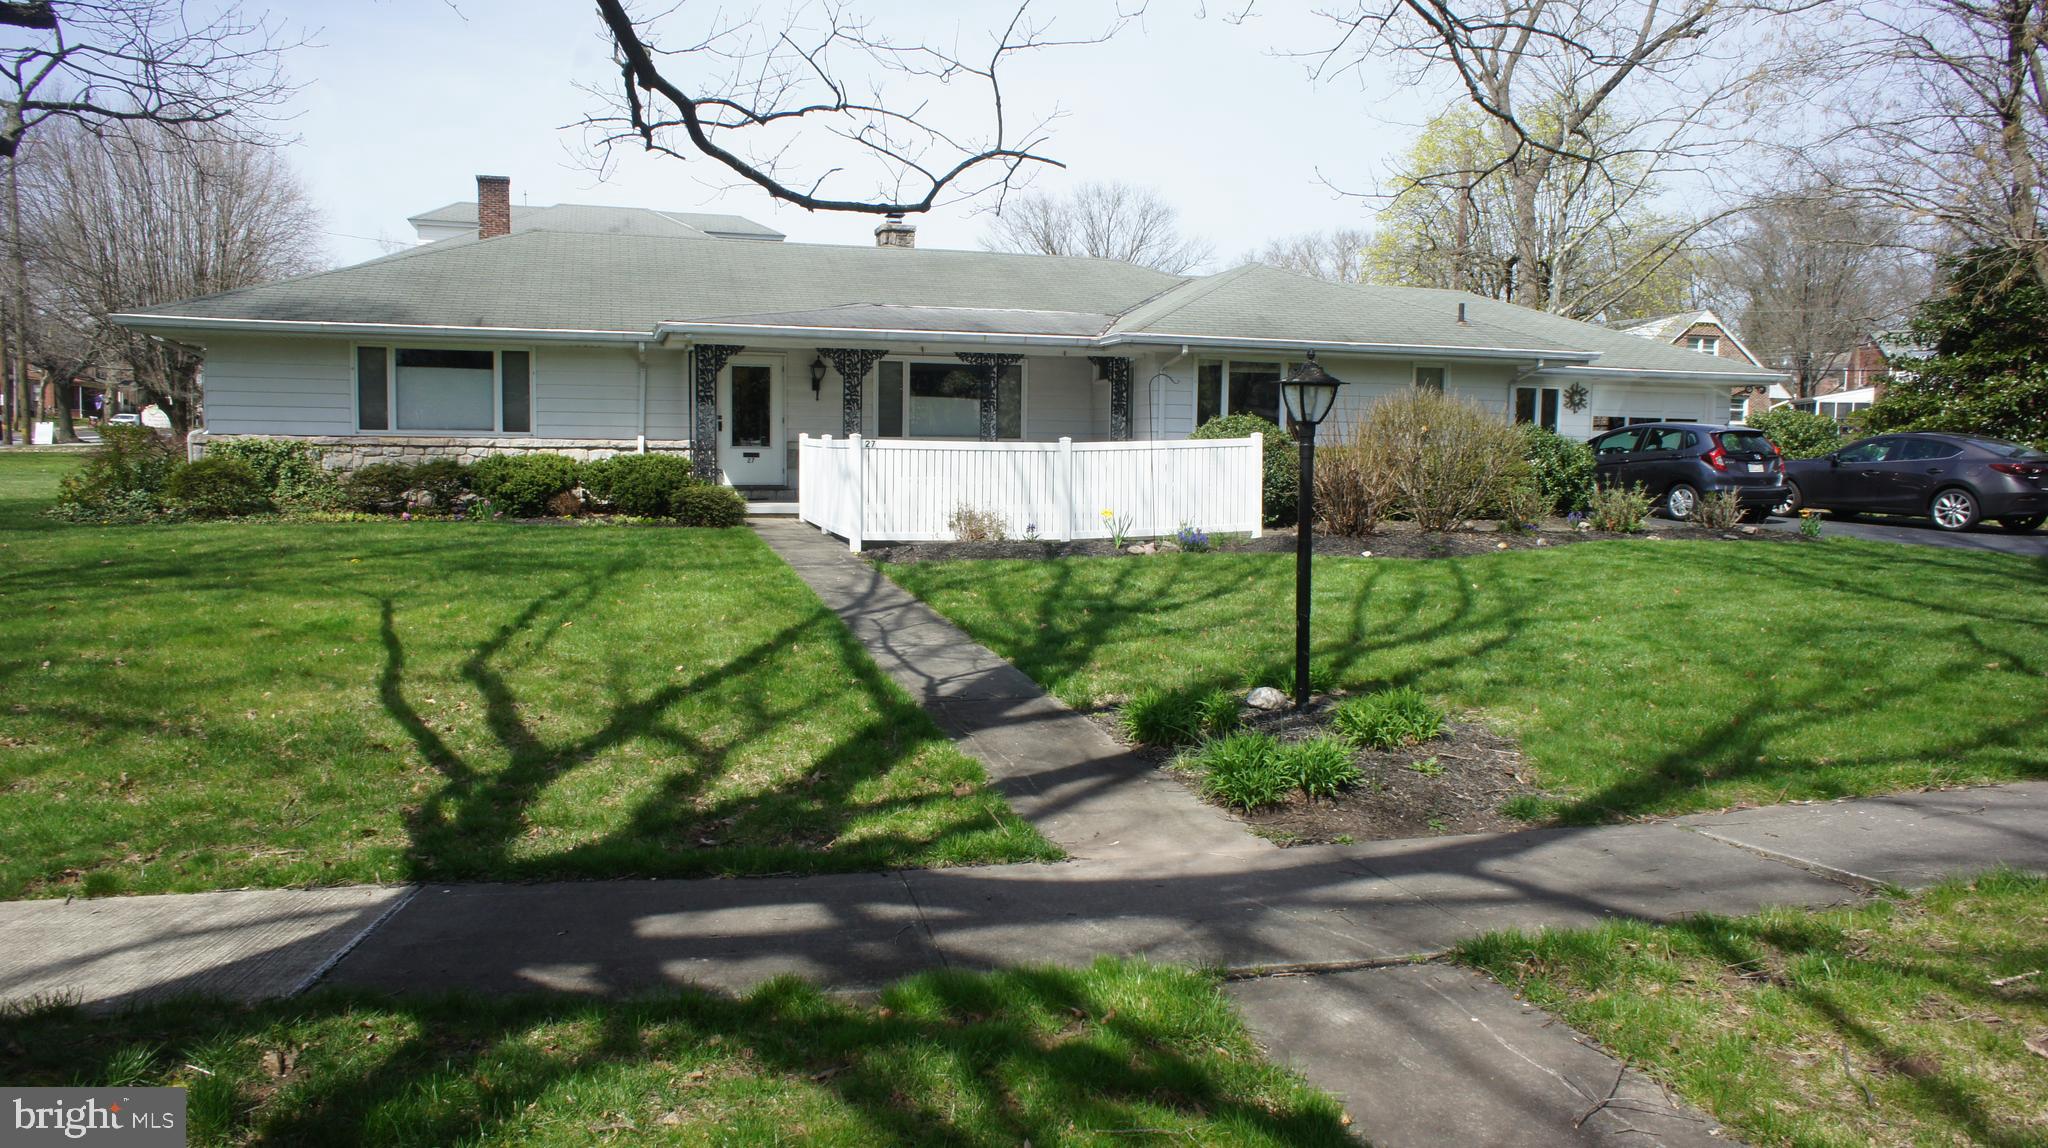 a front view of a residential houses with yard and green space